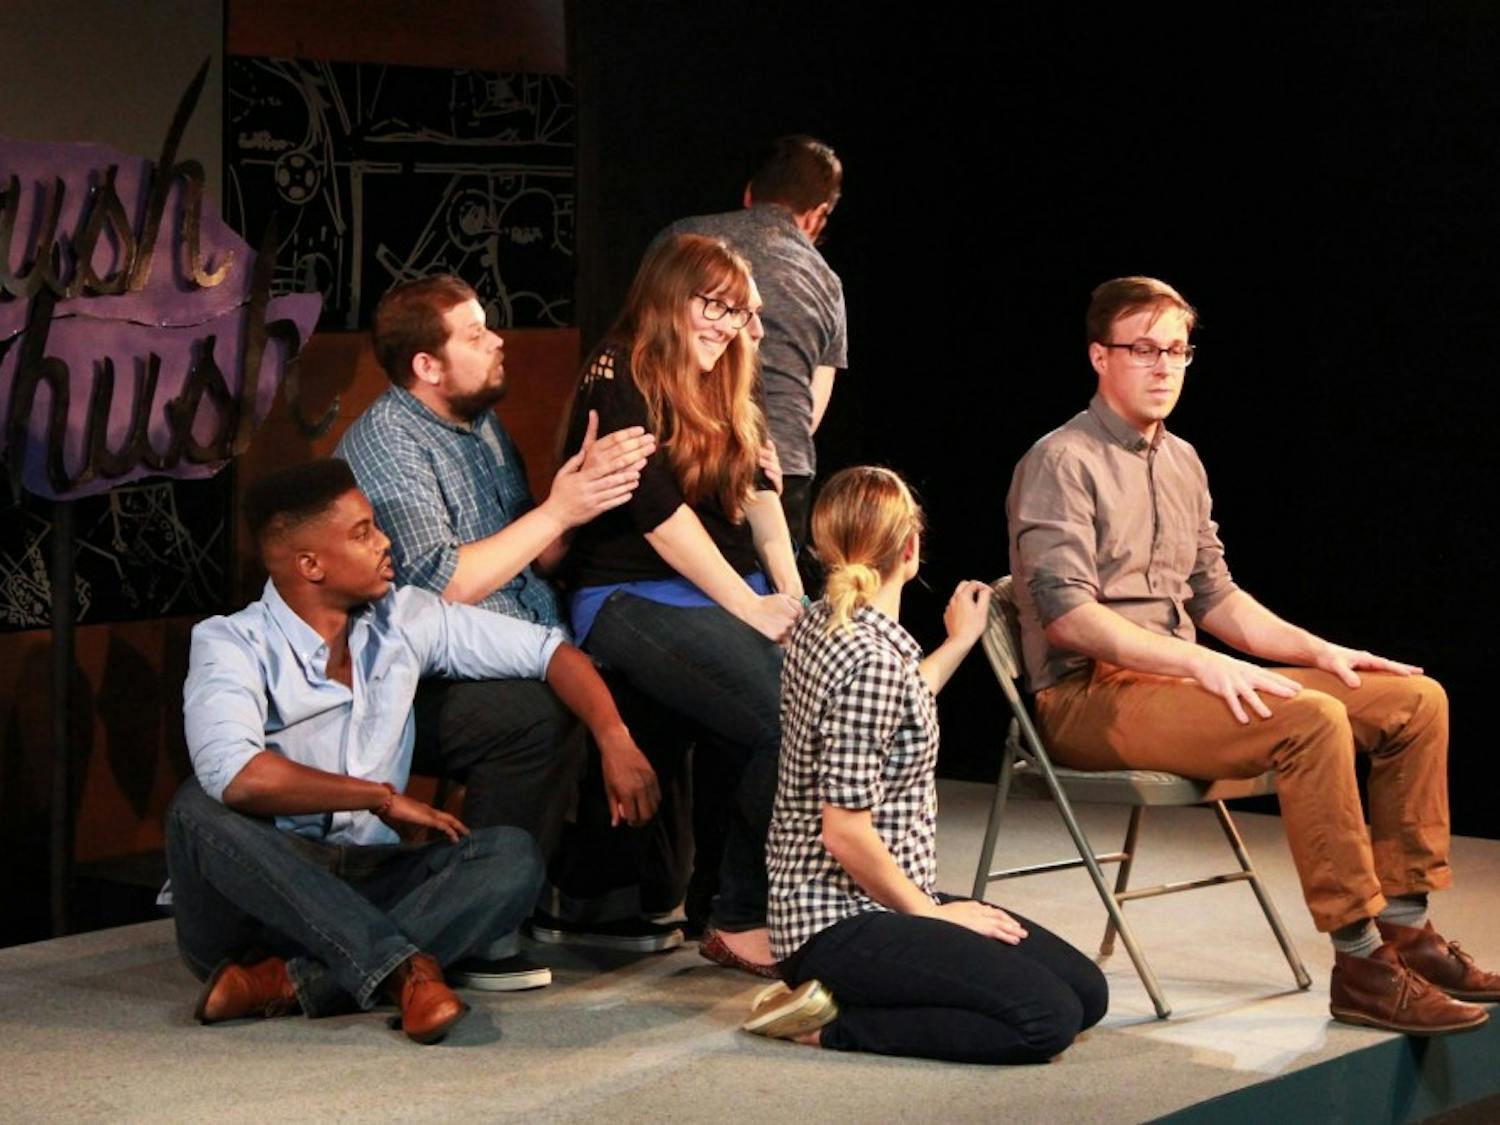 Mettlesome hosts "Hush Hush," an improv show based on people revealing their secrets. Photo courtesy of Ashley Melzer.